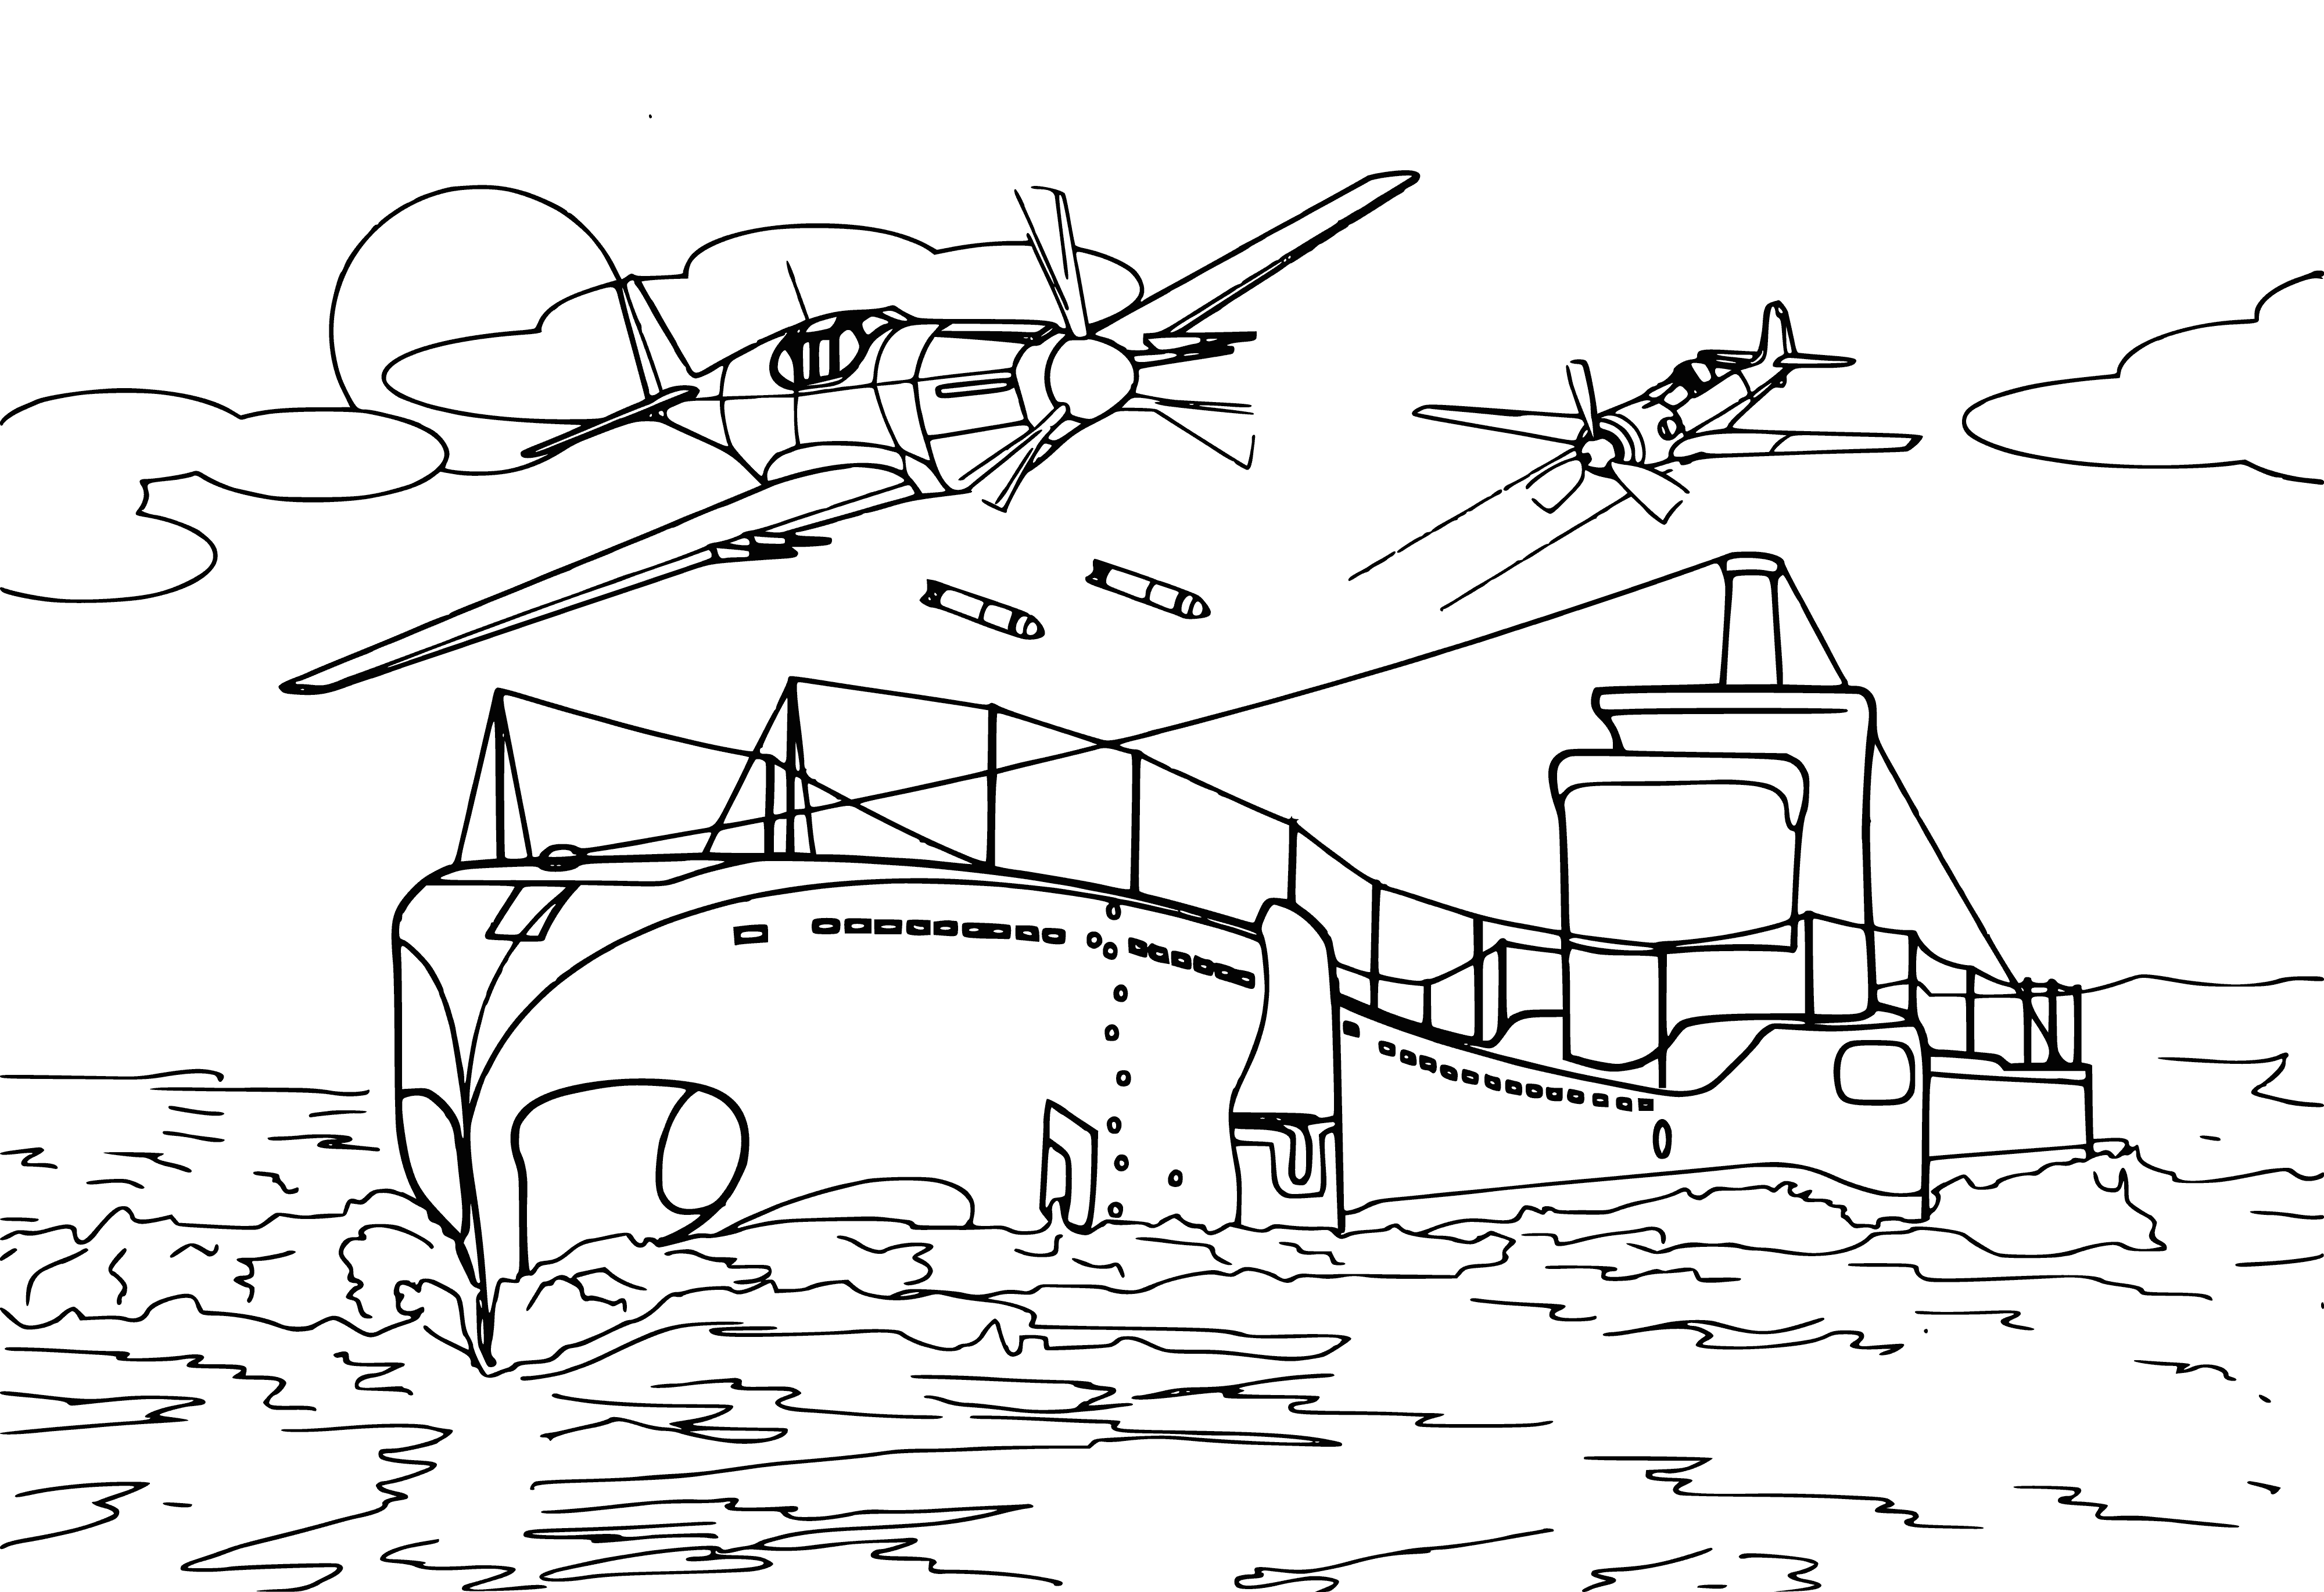 coloring page: Underwater sub sails long & thin. 8 large fins, rounded nose & small conning tower, plus a propeller at the back. #submarine #sail